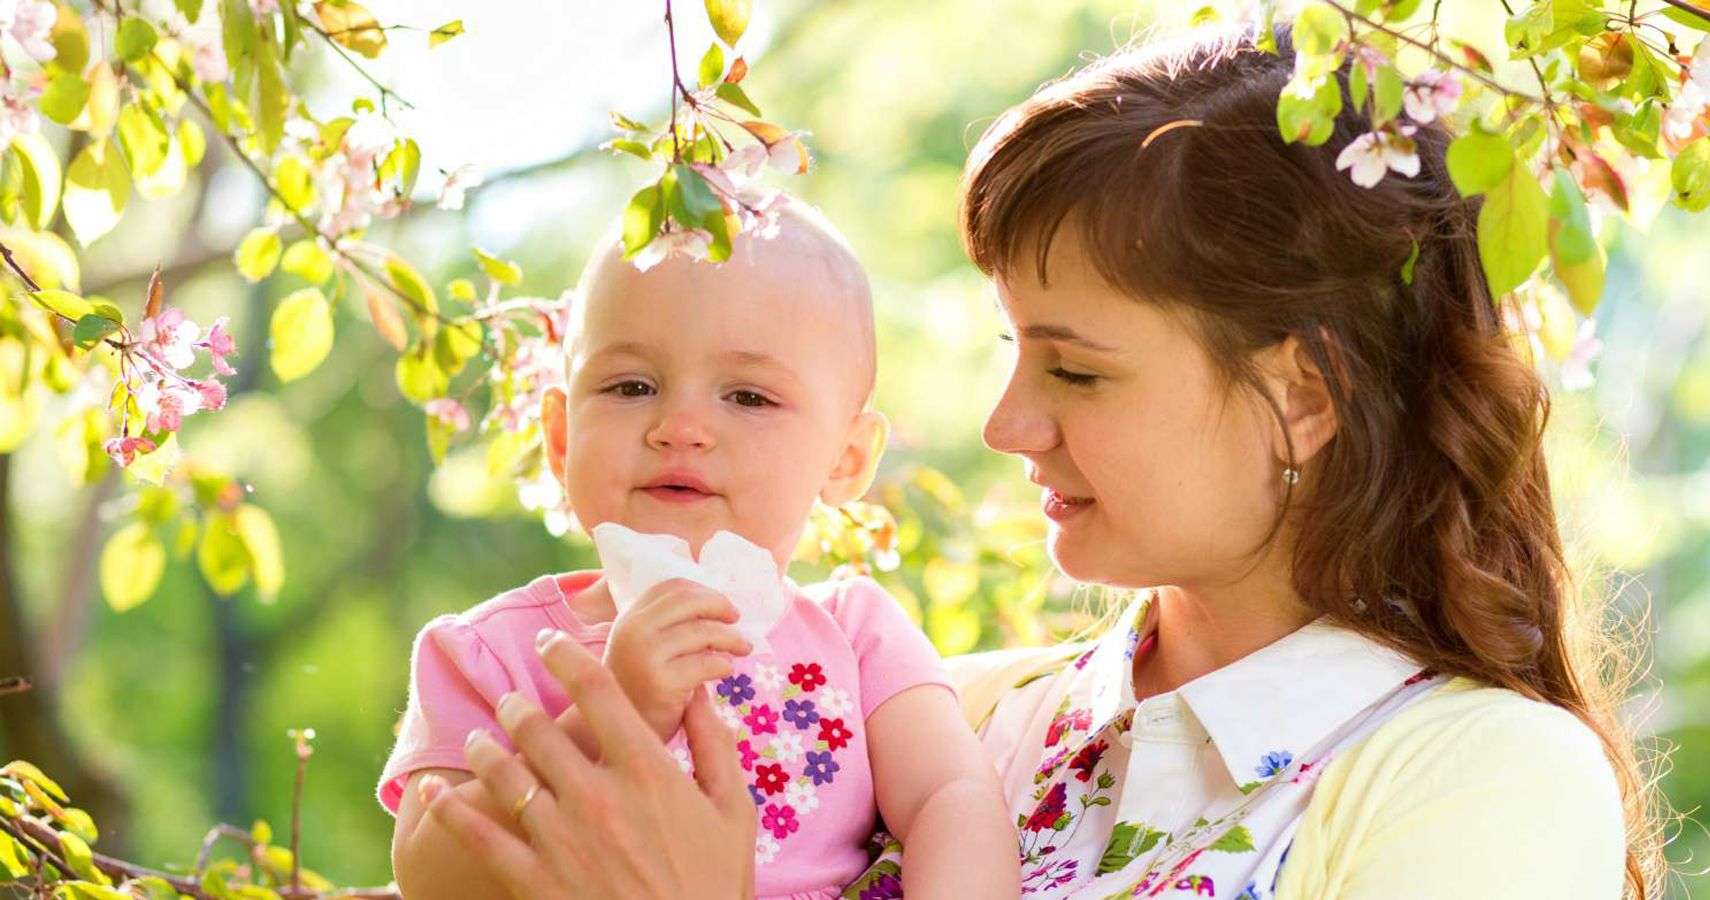 10 Facts About Babies And Seasonal Allergies